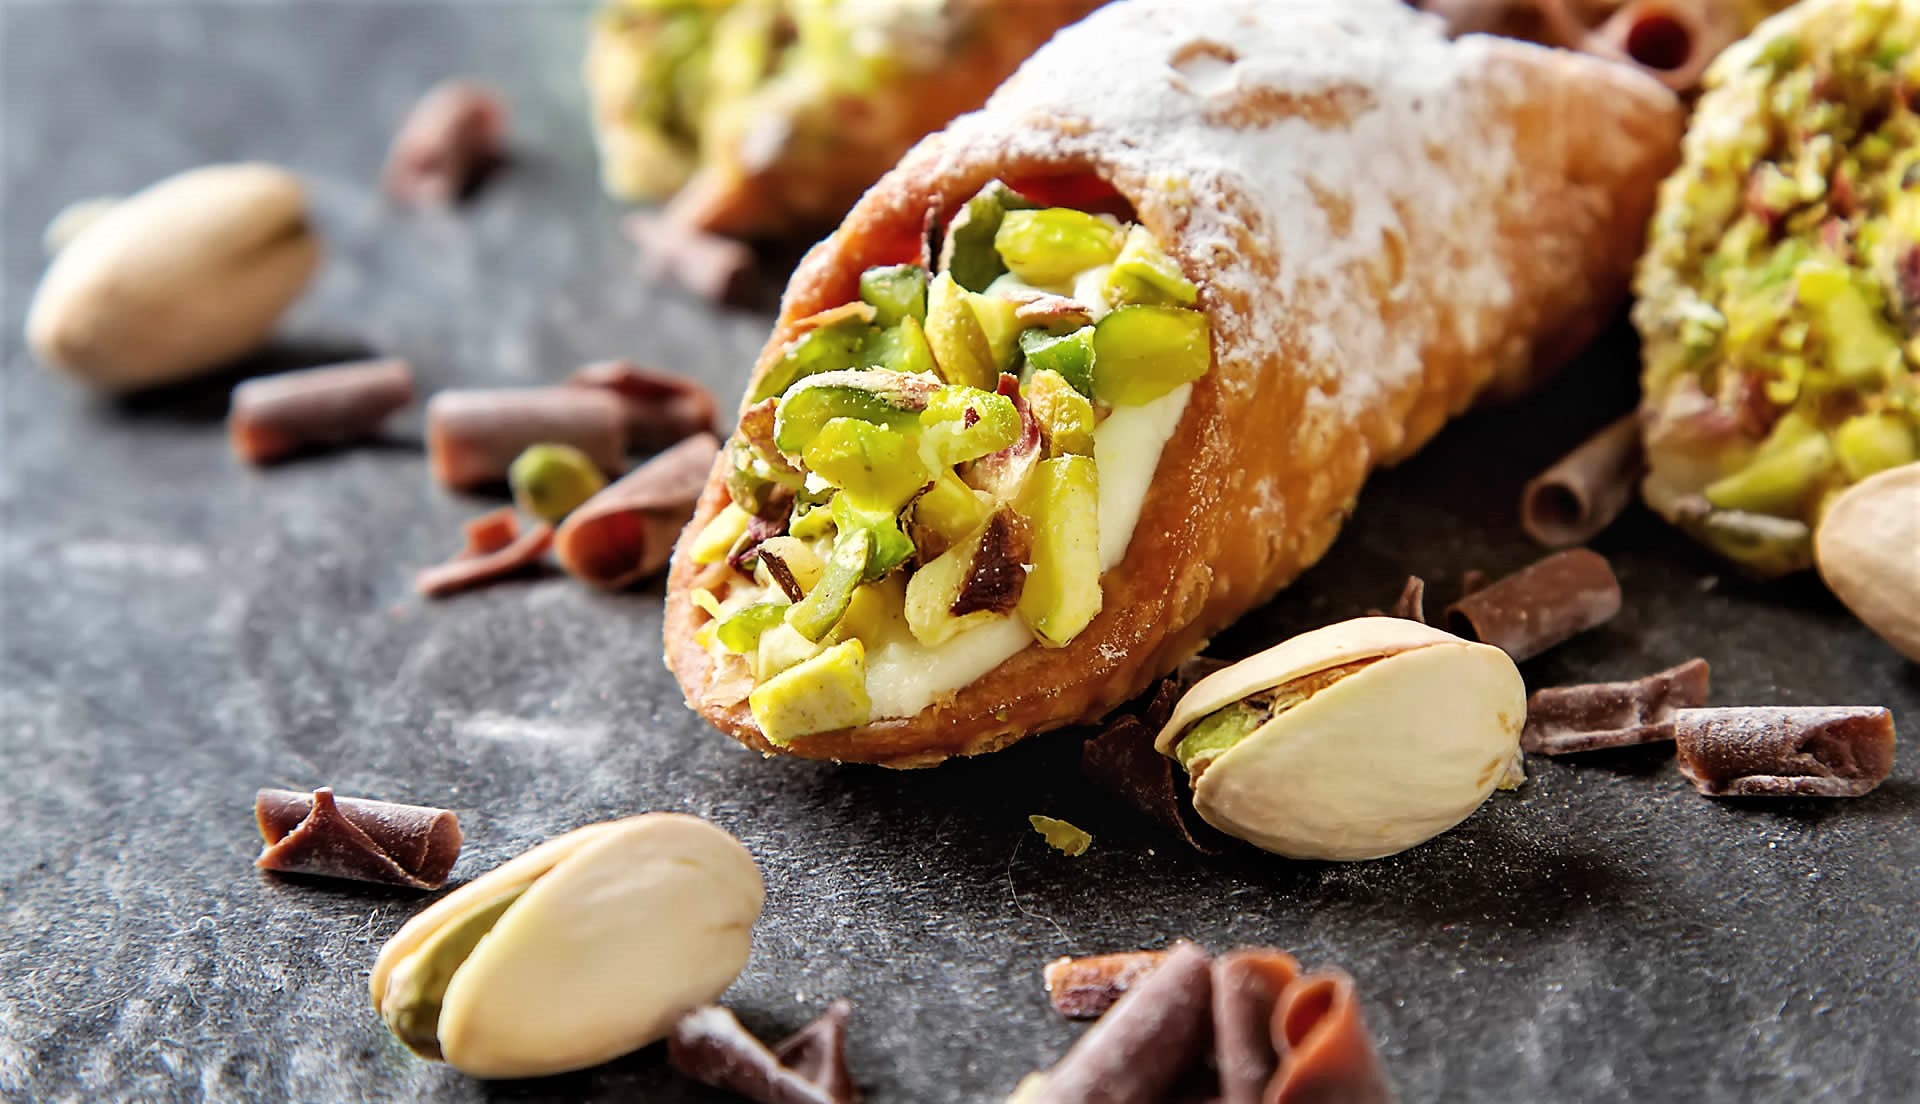 The cannoli in history